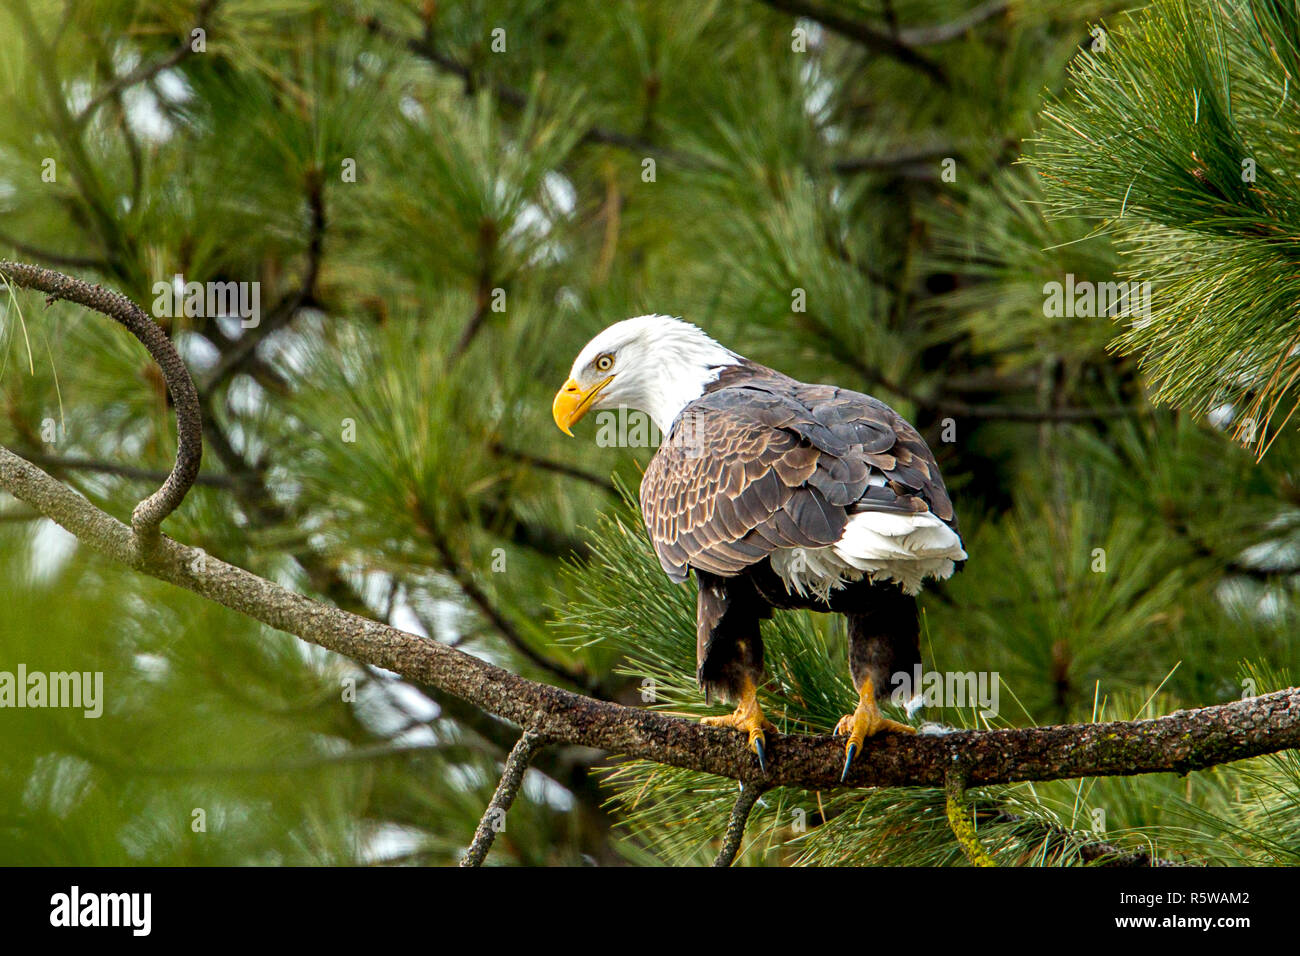 An American bald eagle is perched in a tree by Coeur d'Alene Lake in Idaho. Stock Photo